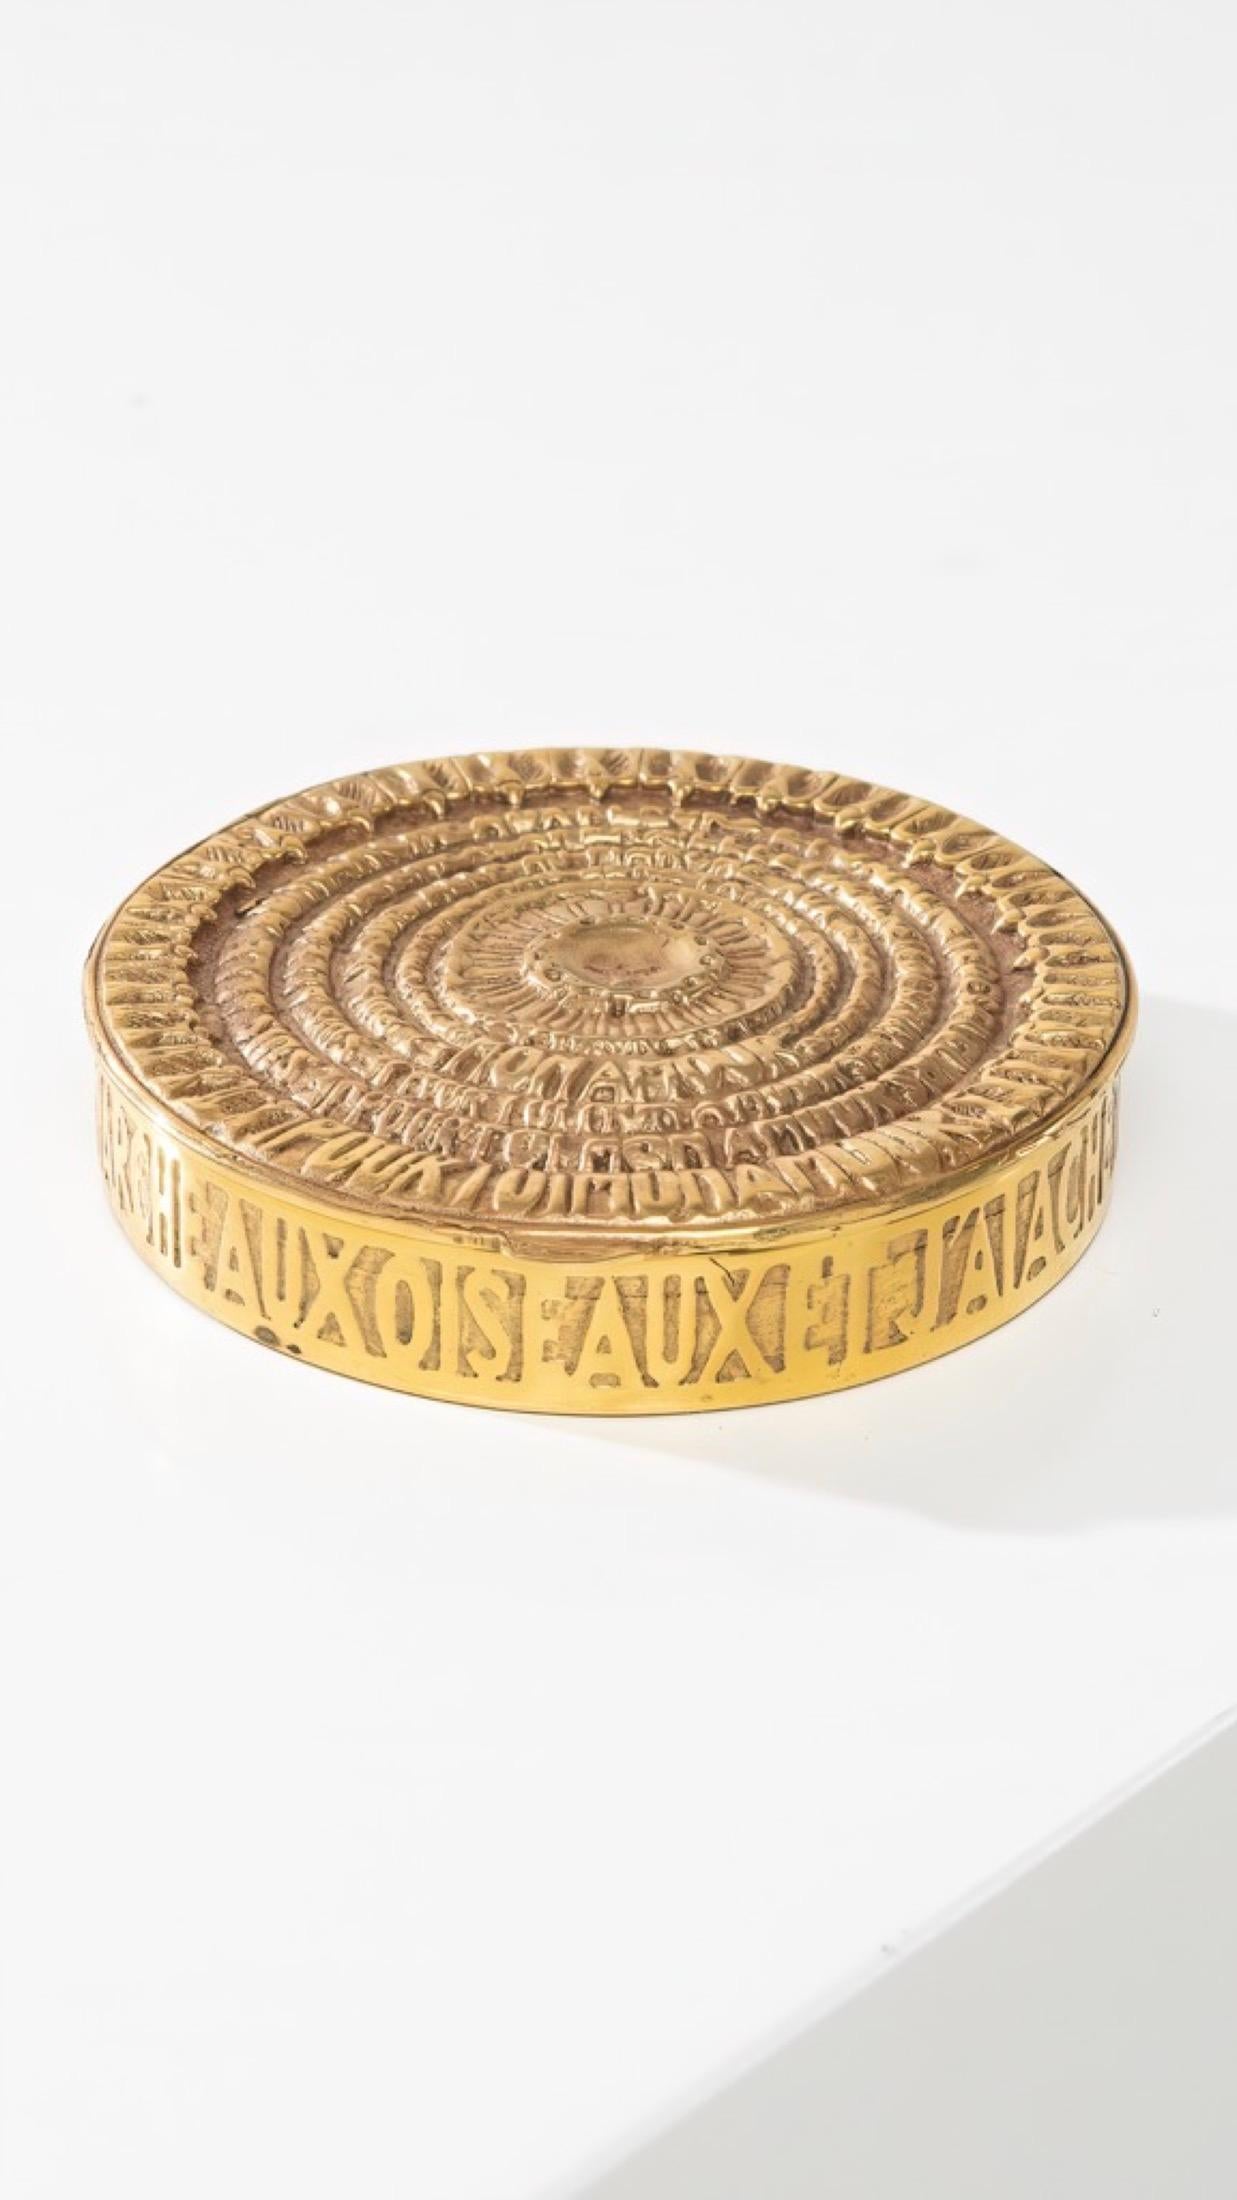 Mid-Century Modern Pour toi mon Amour (For you my love) by Line Vautrin – Gilt bronze compact